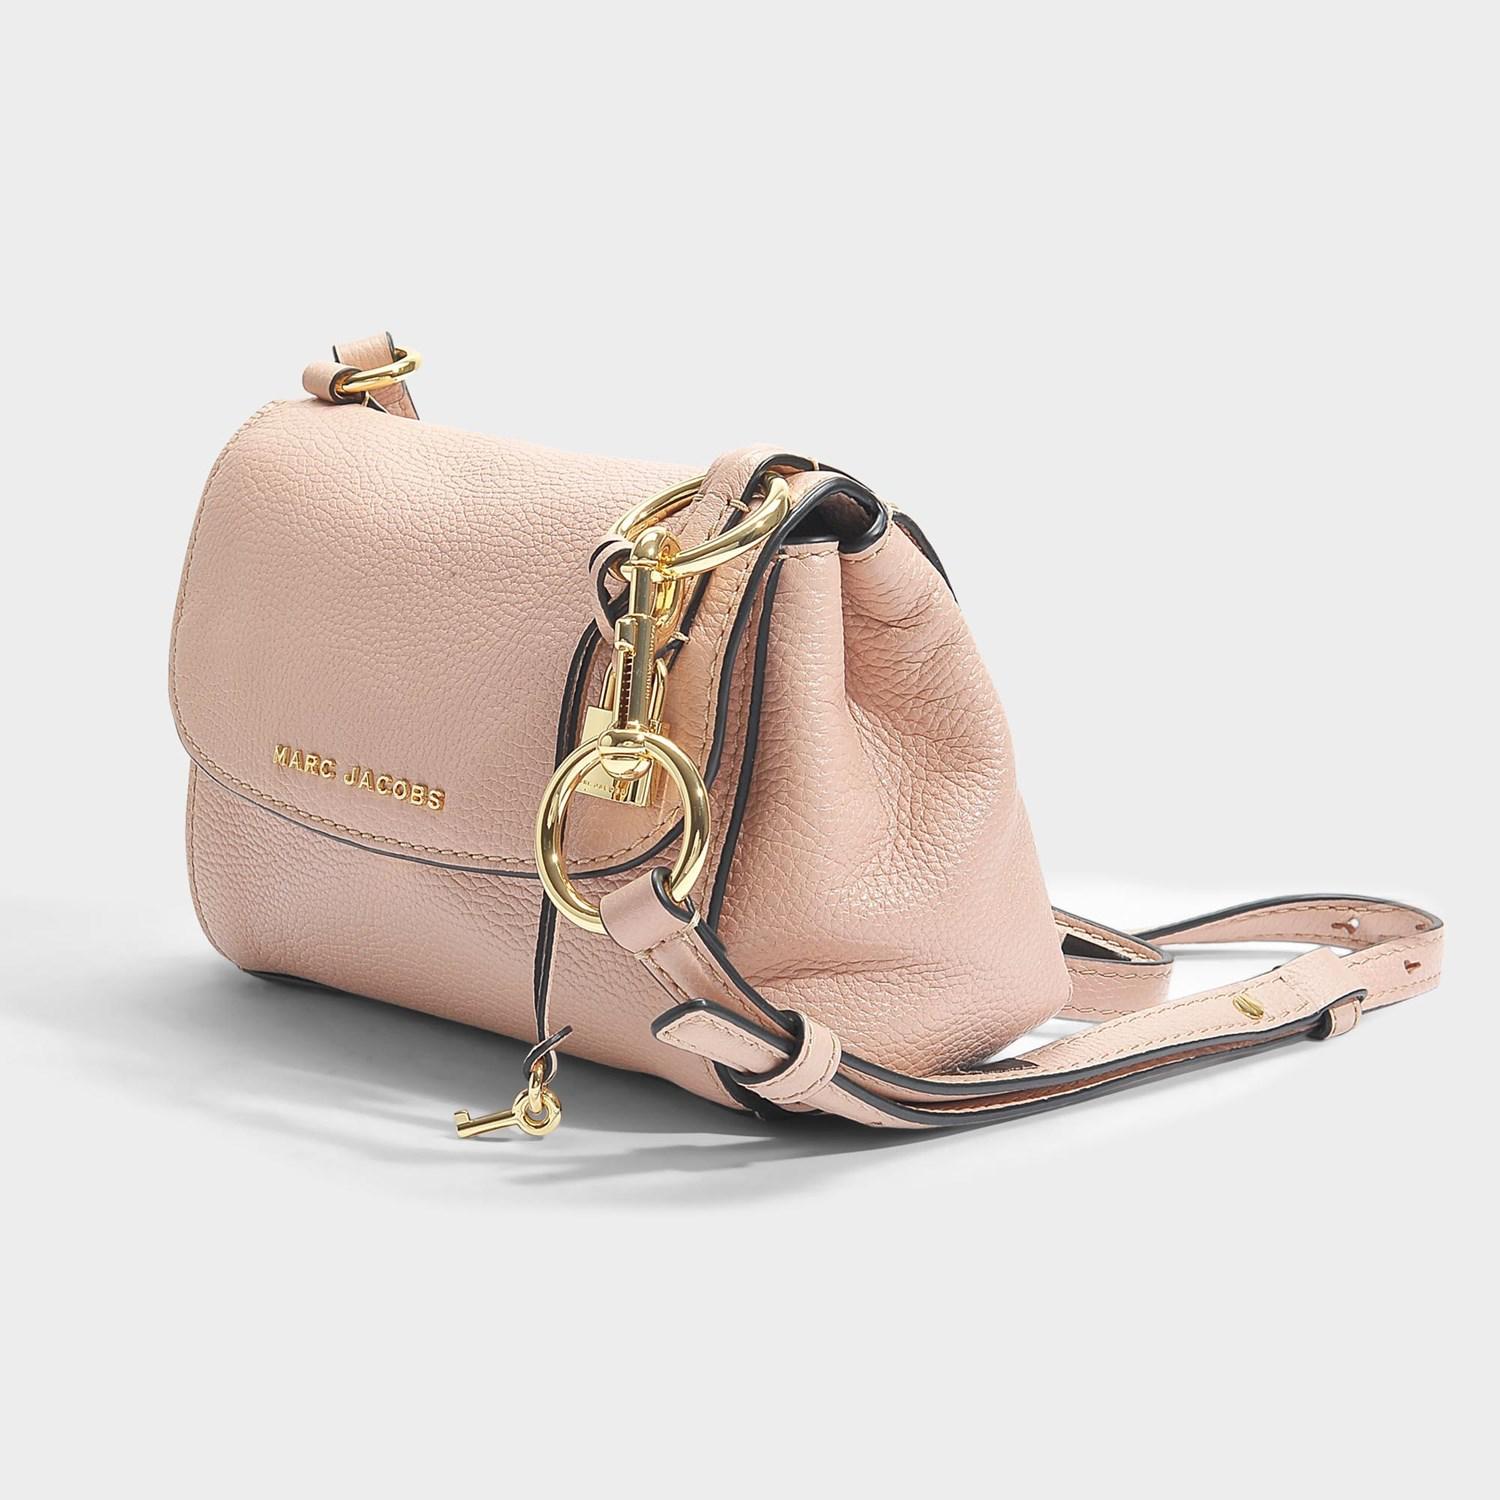 Marc Jacobs The Mini Boho Grind Crossbody Bag in Pink - Lyst